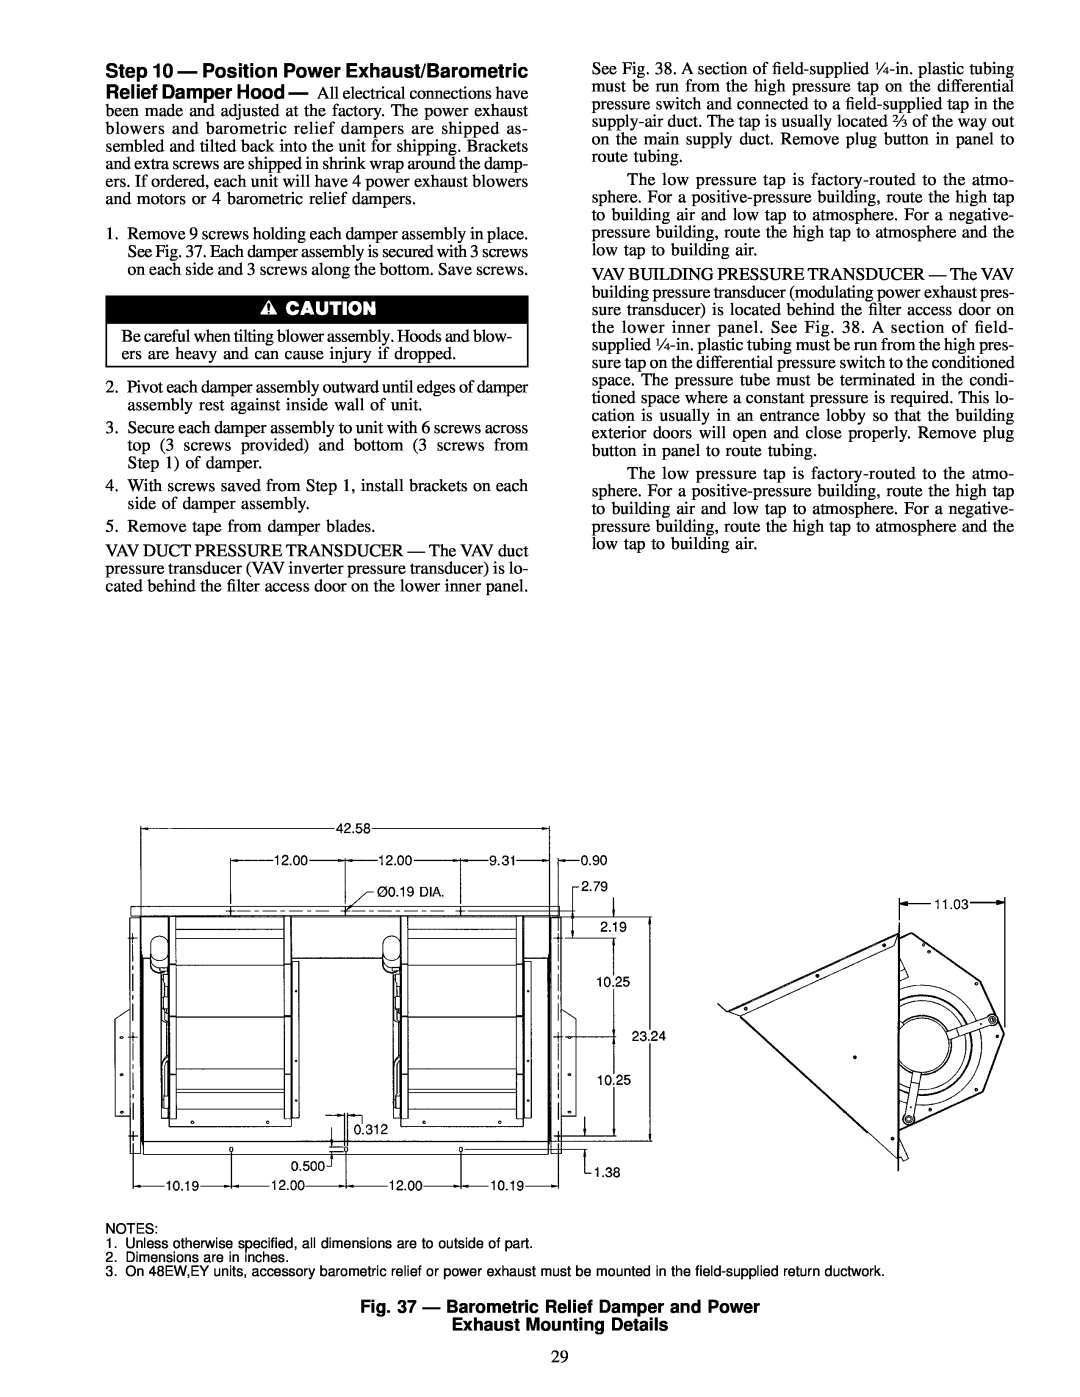 Carrier EW, 48EJ, EK, EY024-048 installation instructions Ð Barometric Relief Damper and Power, Exhaust Mounting Details 